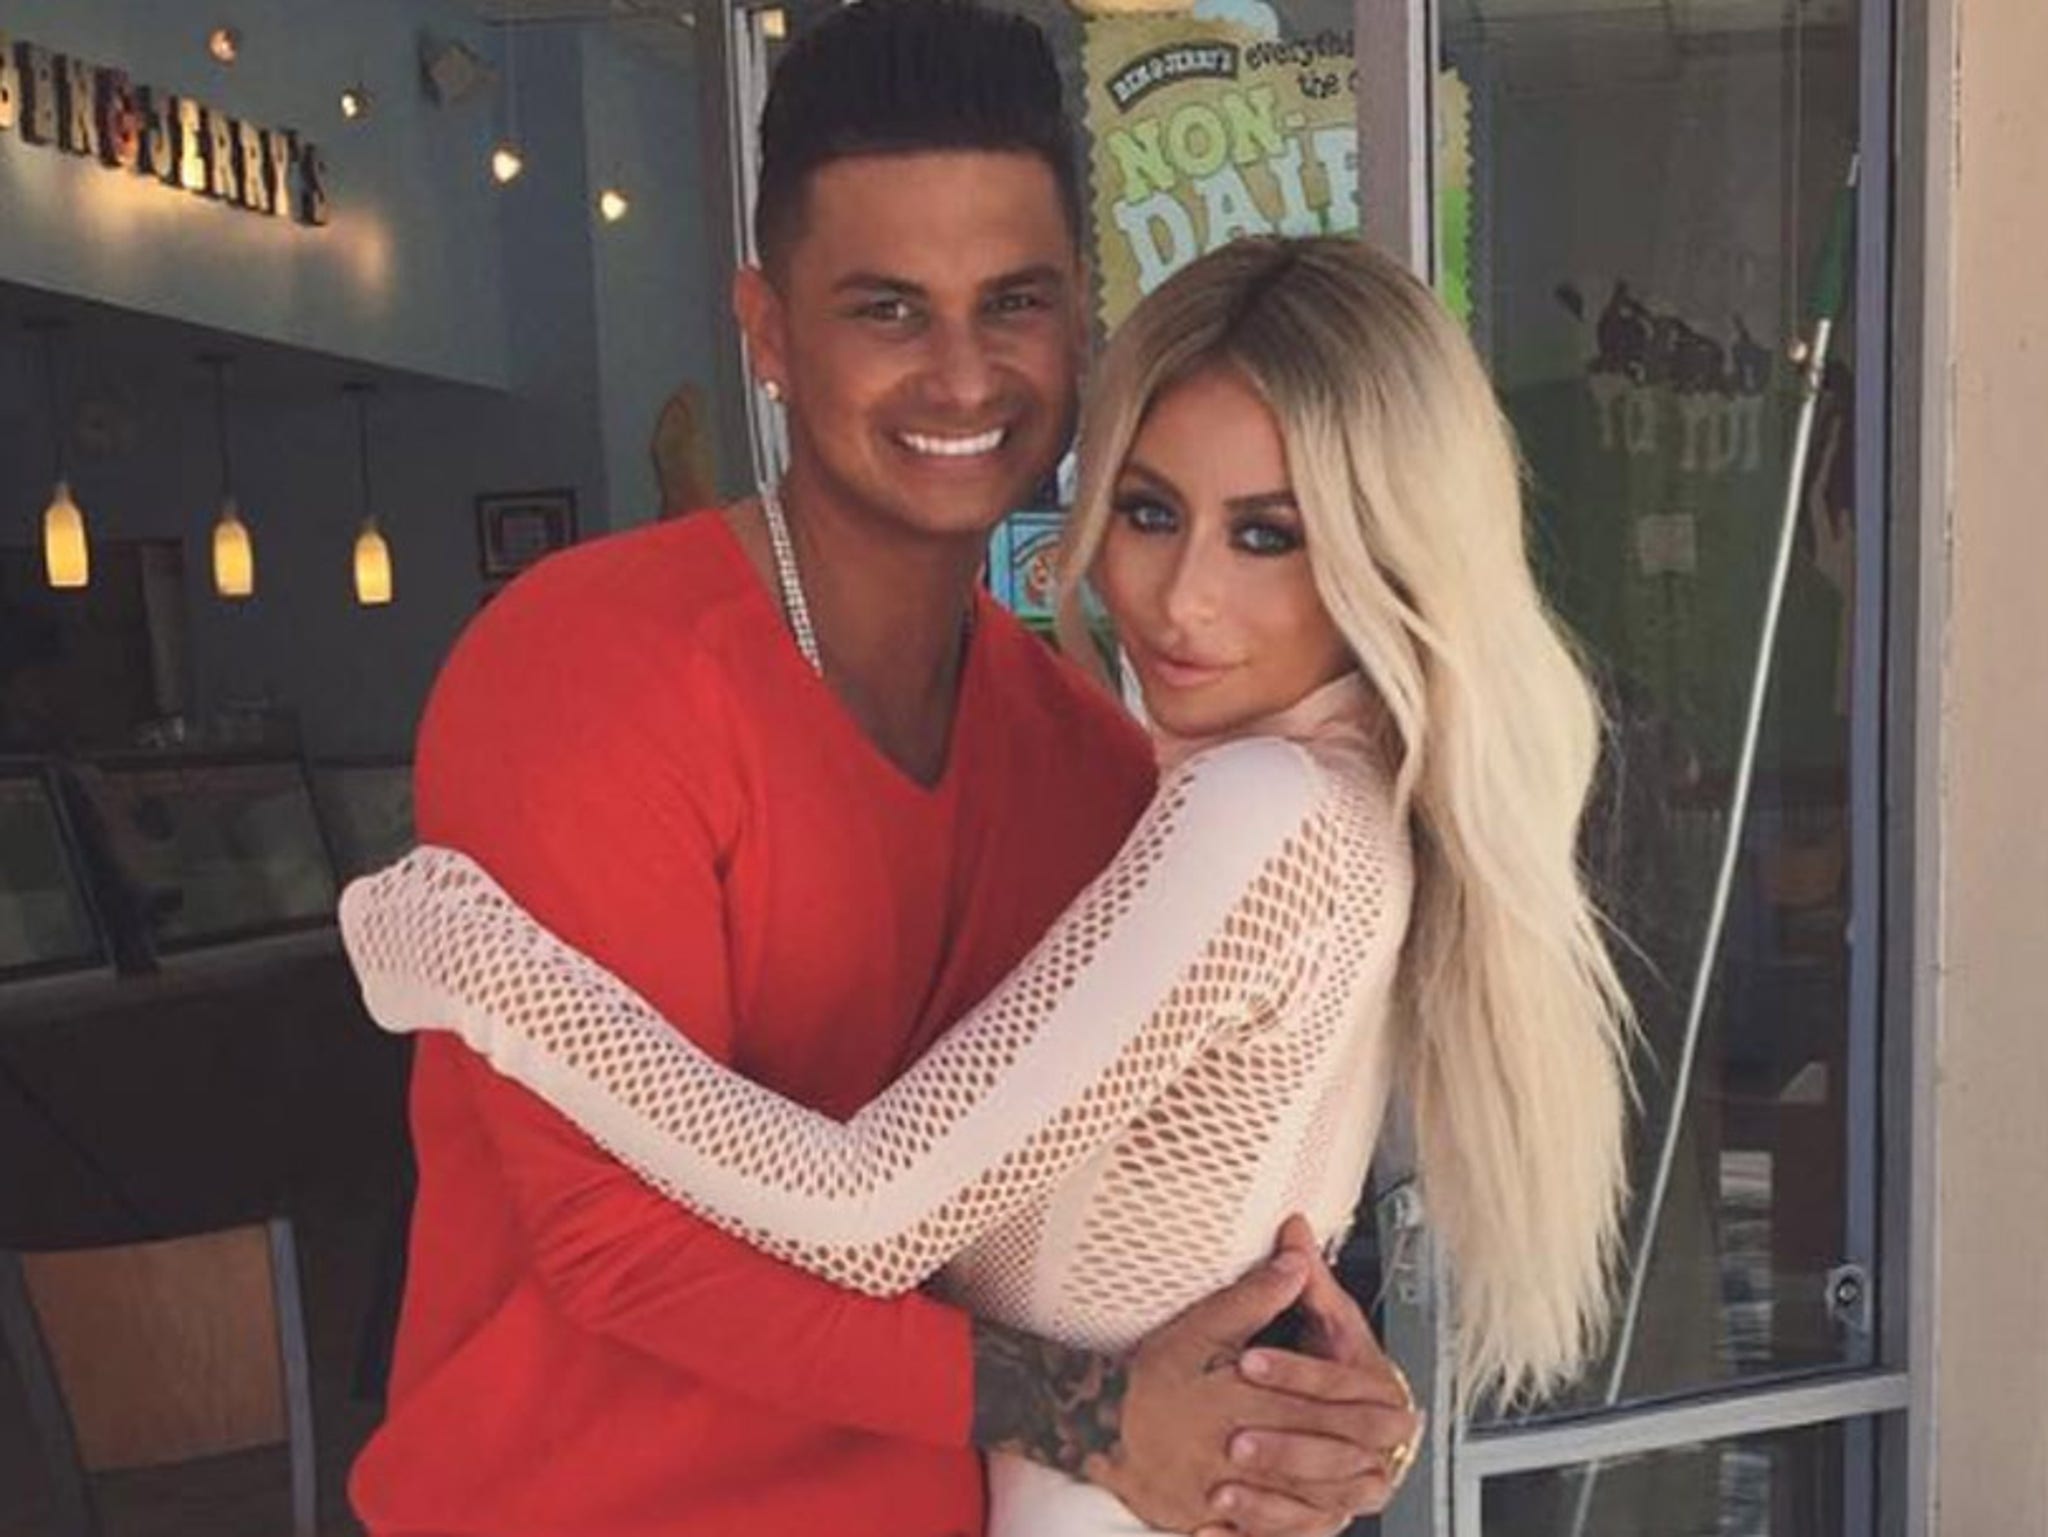 New Photos Show Pauly D's Rarely Seen Daughter Celebrating a